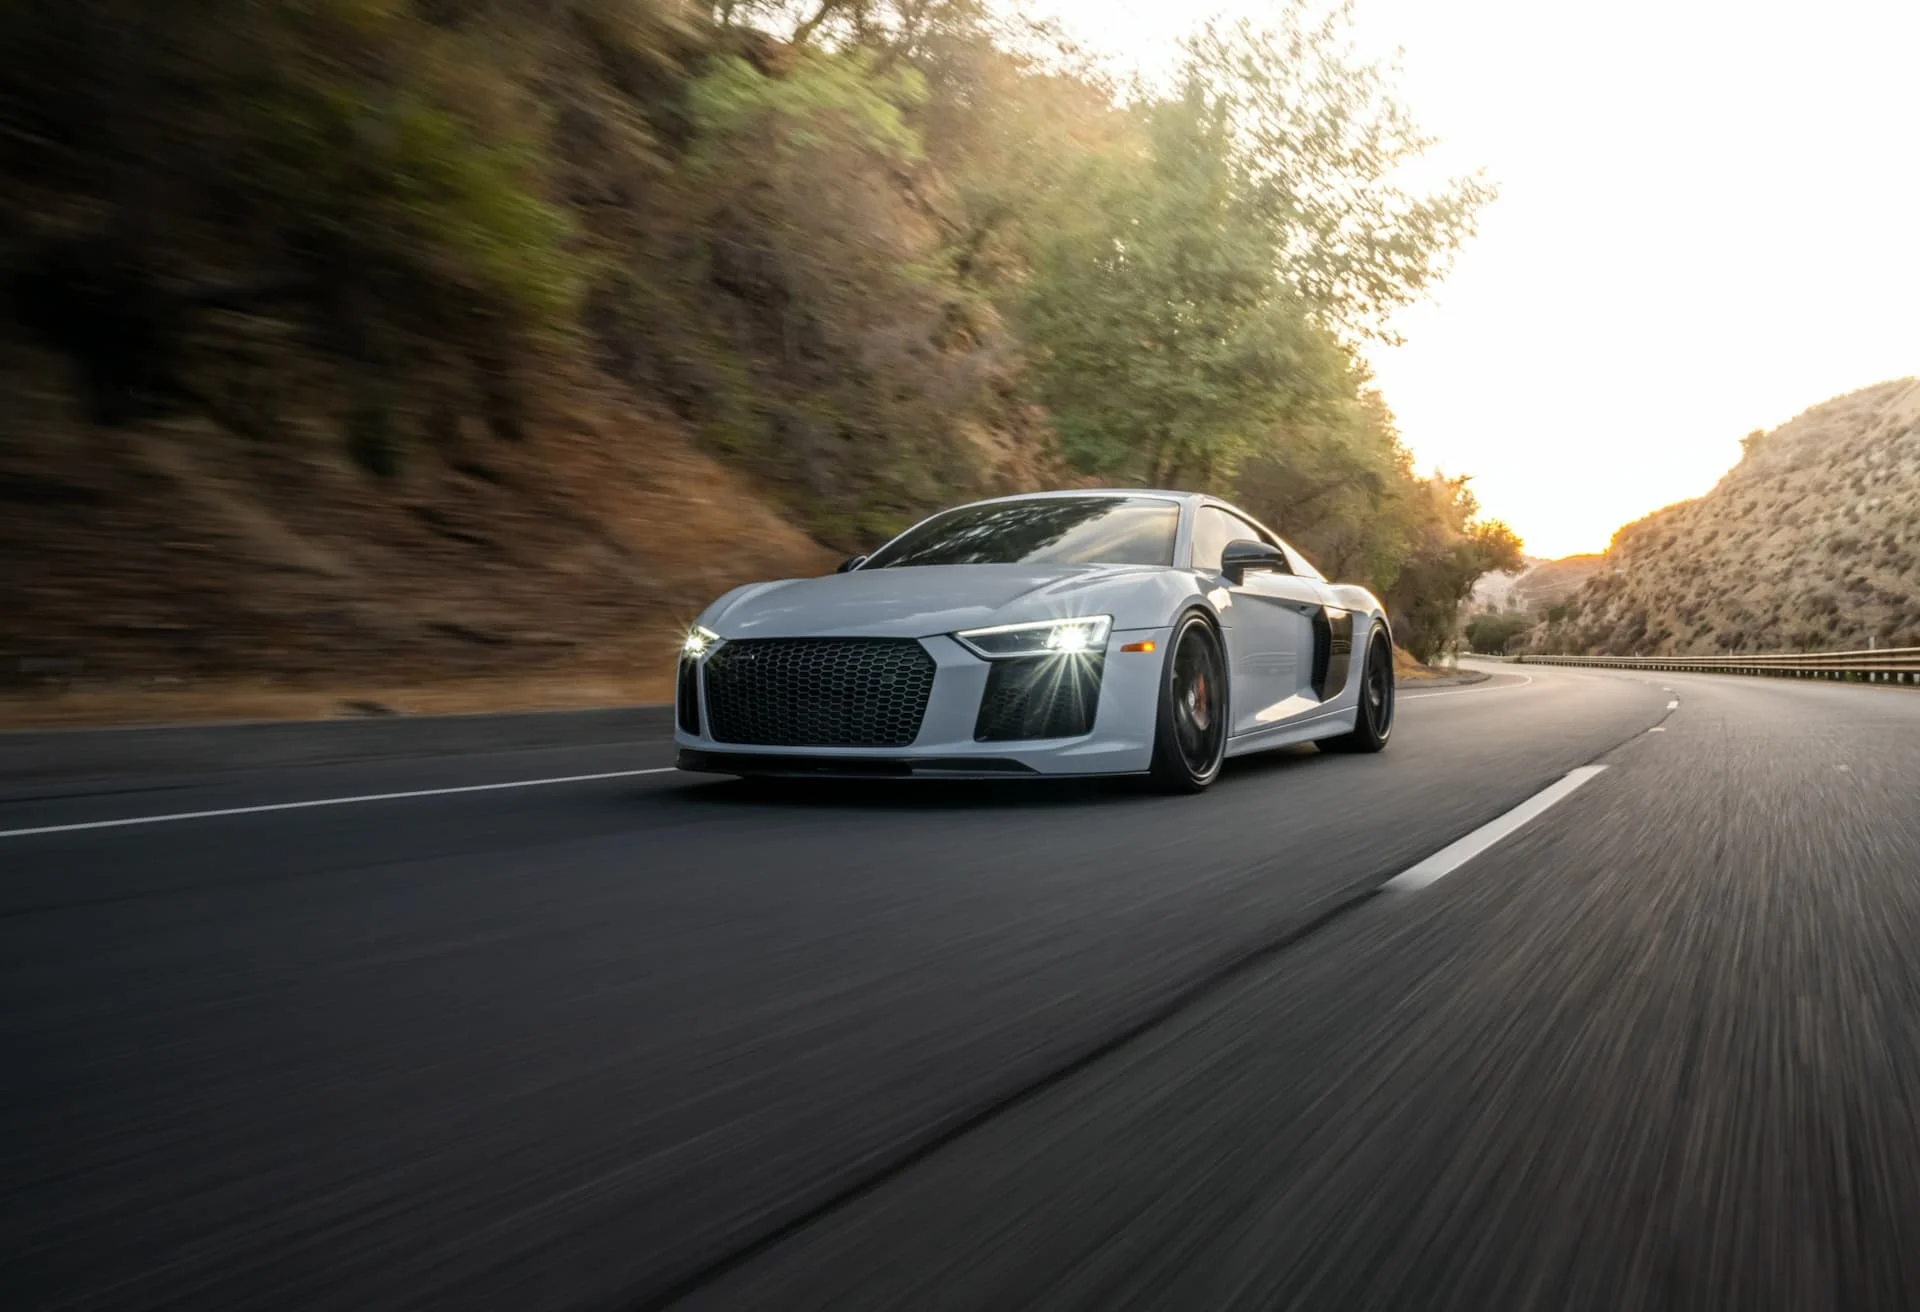 A nardo grey Audi R8 driving down a country road